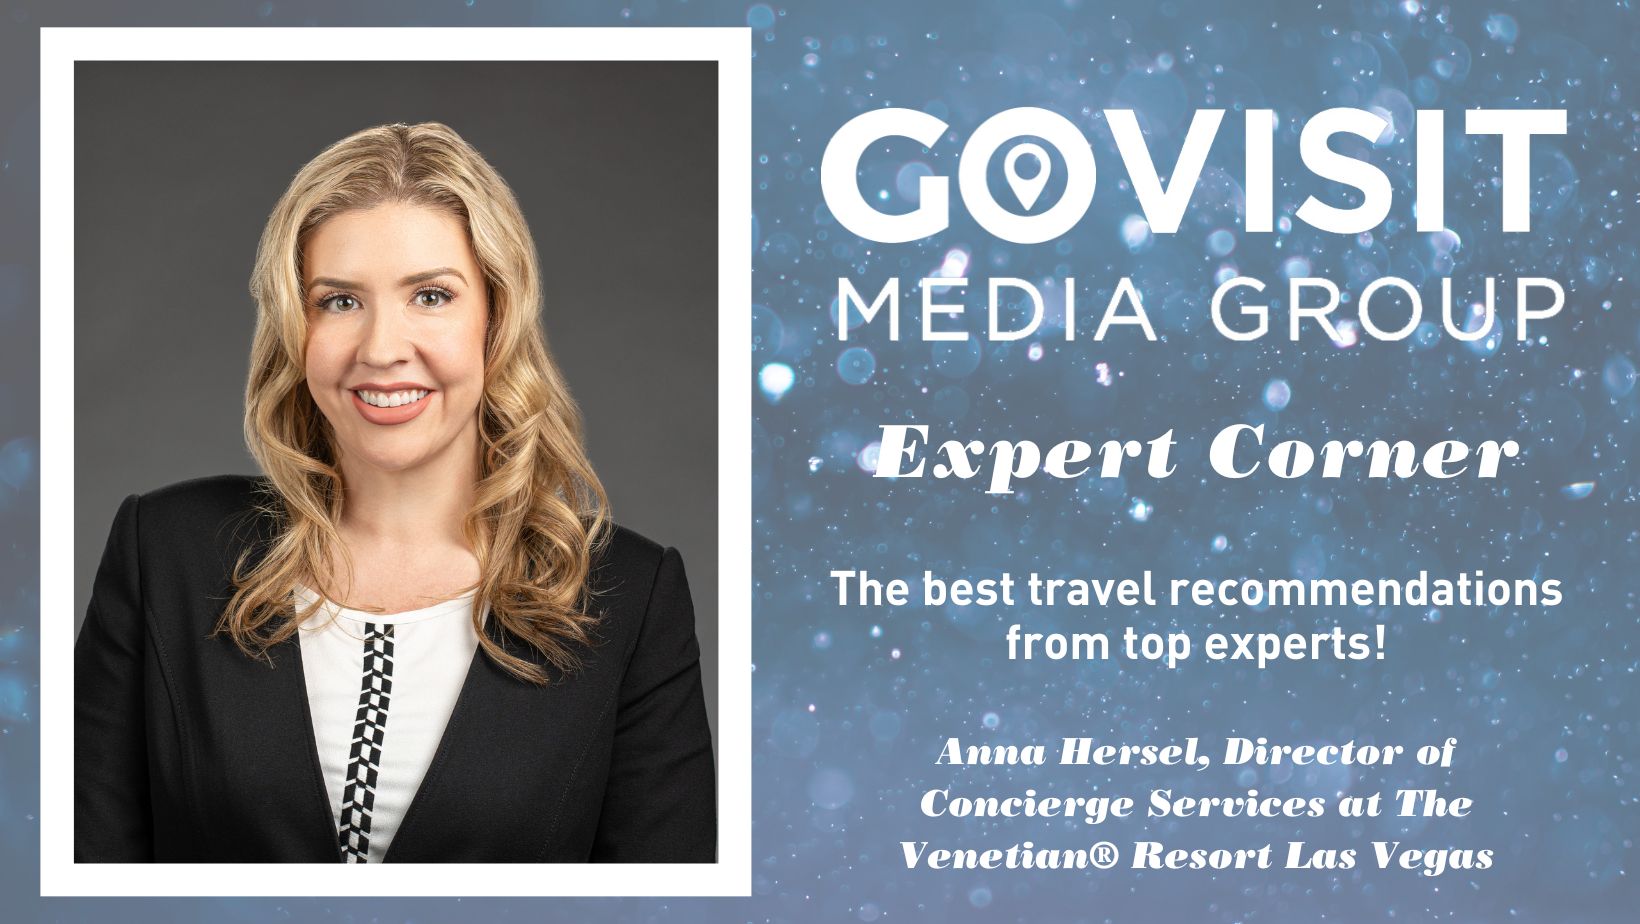 Anna Hersel, Director of Concierge Services at The Venetian® Resort Las Vegas